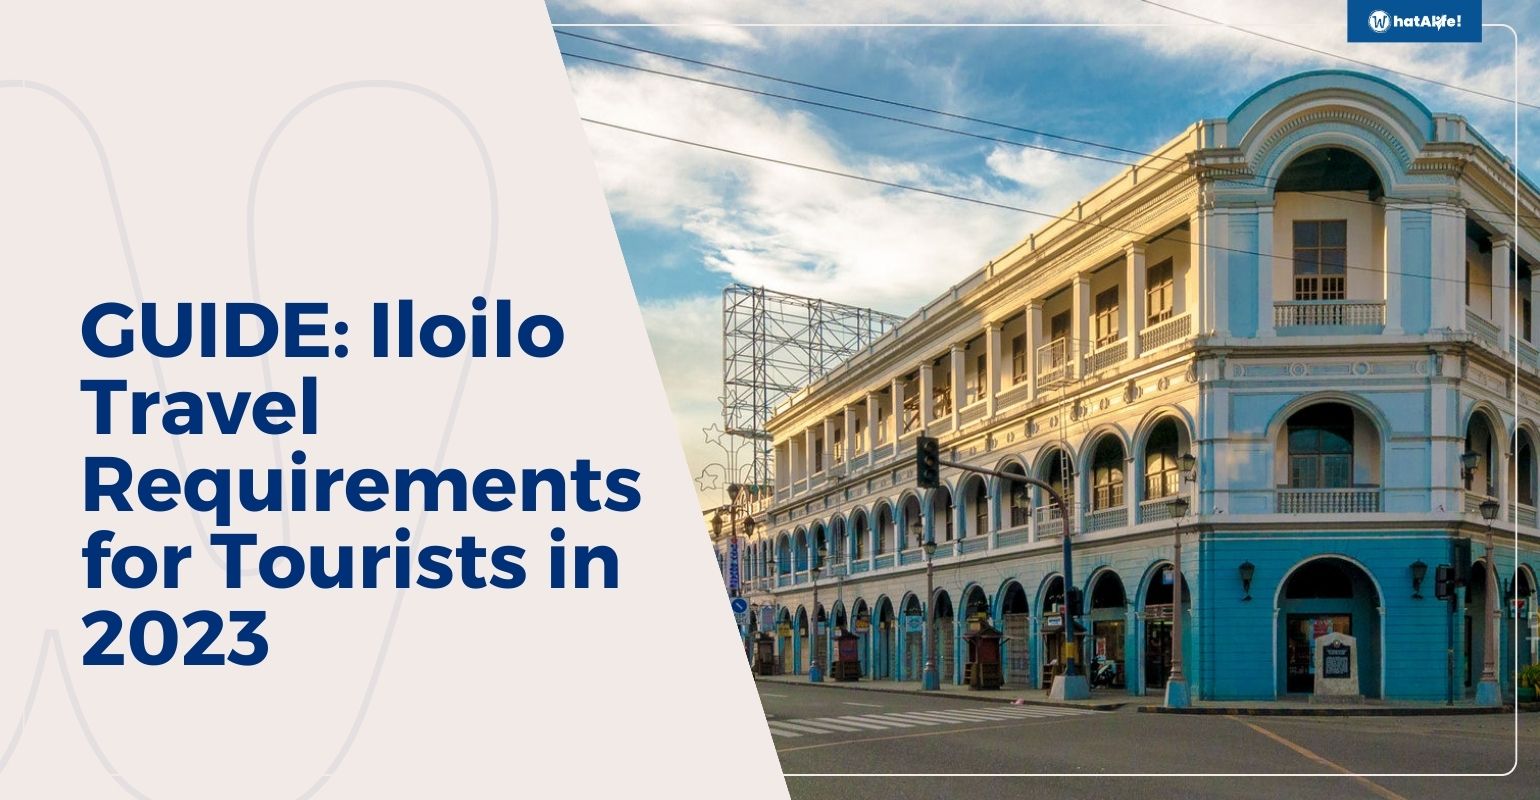 guide iloilo travel requirements for tourists in 2023 1